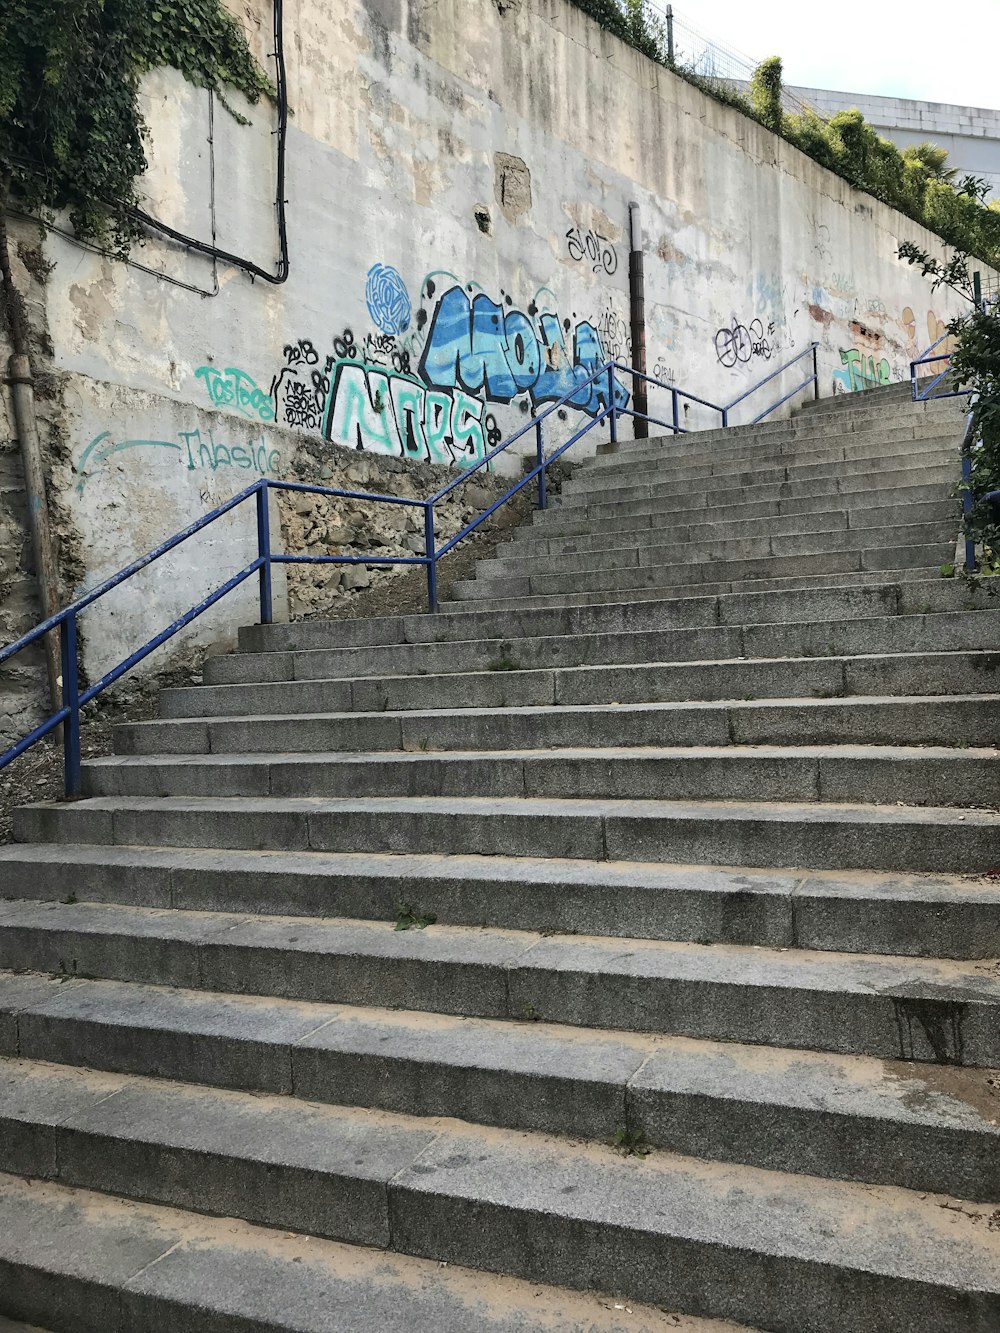 a set of stairs with graffiti on the walls